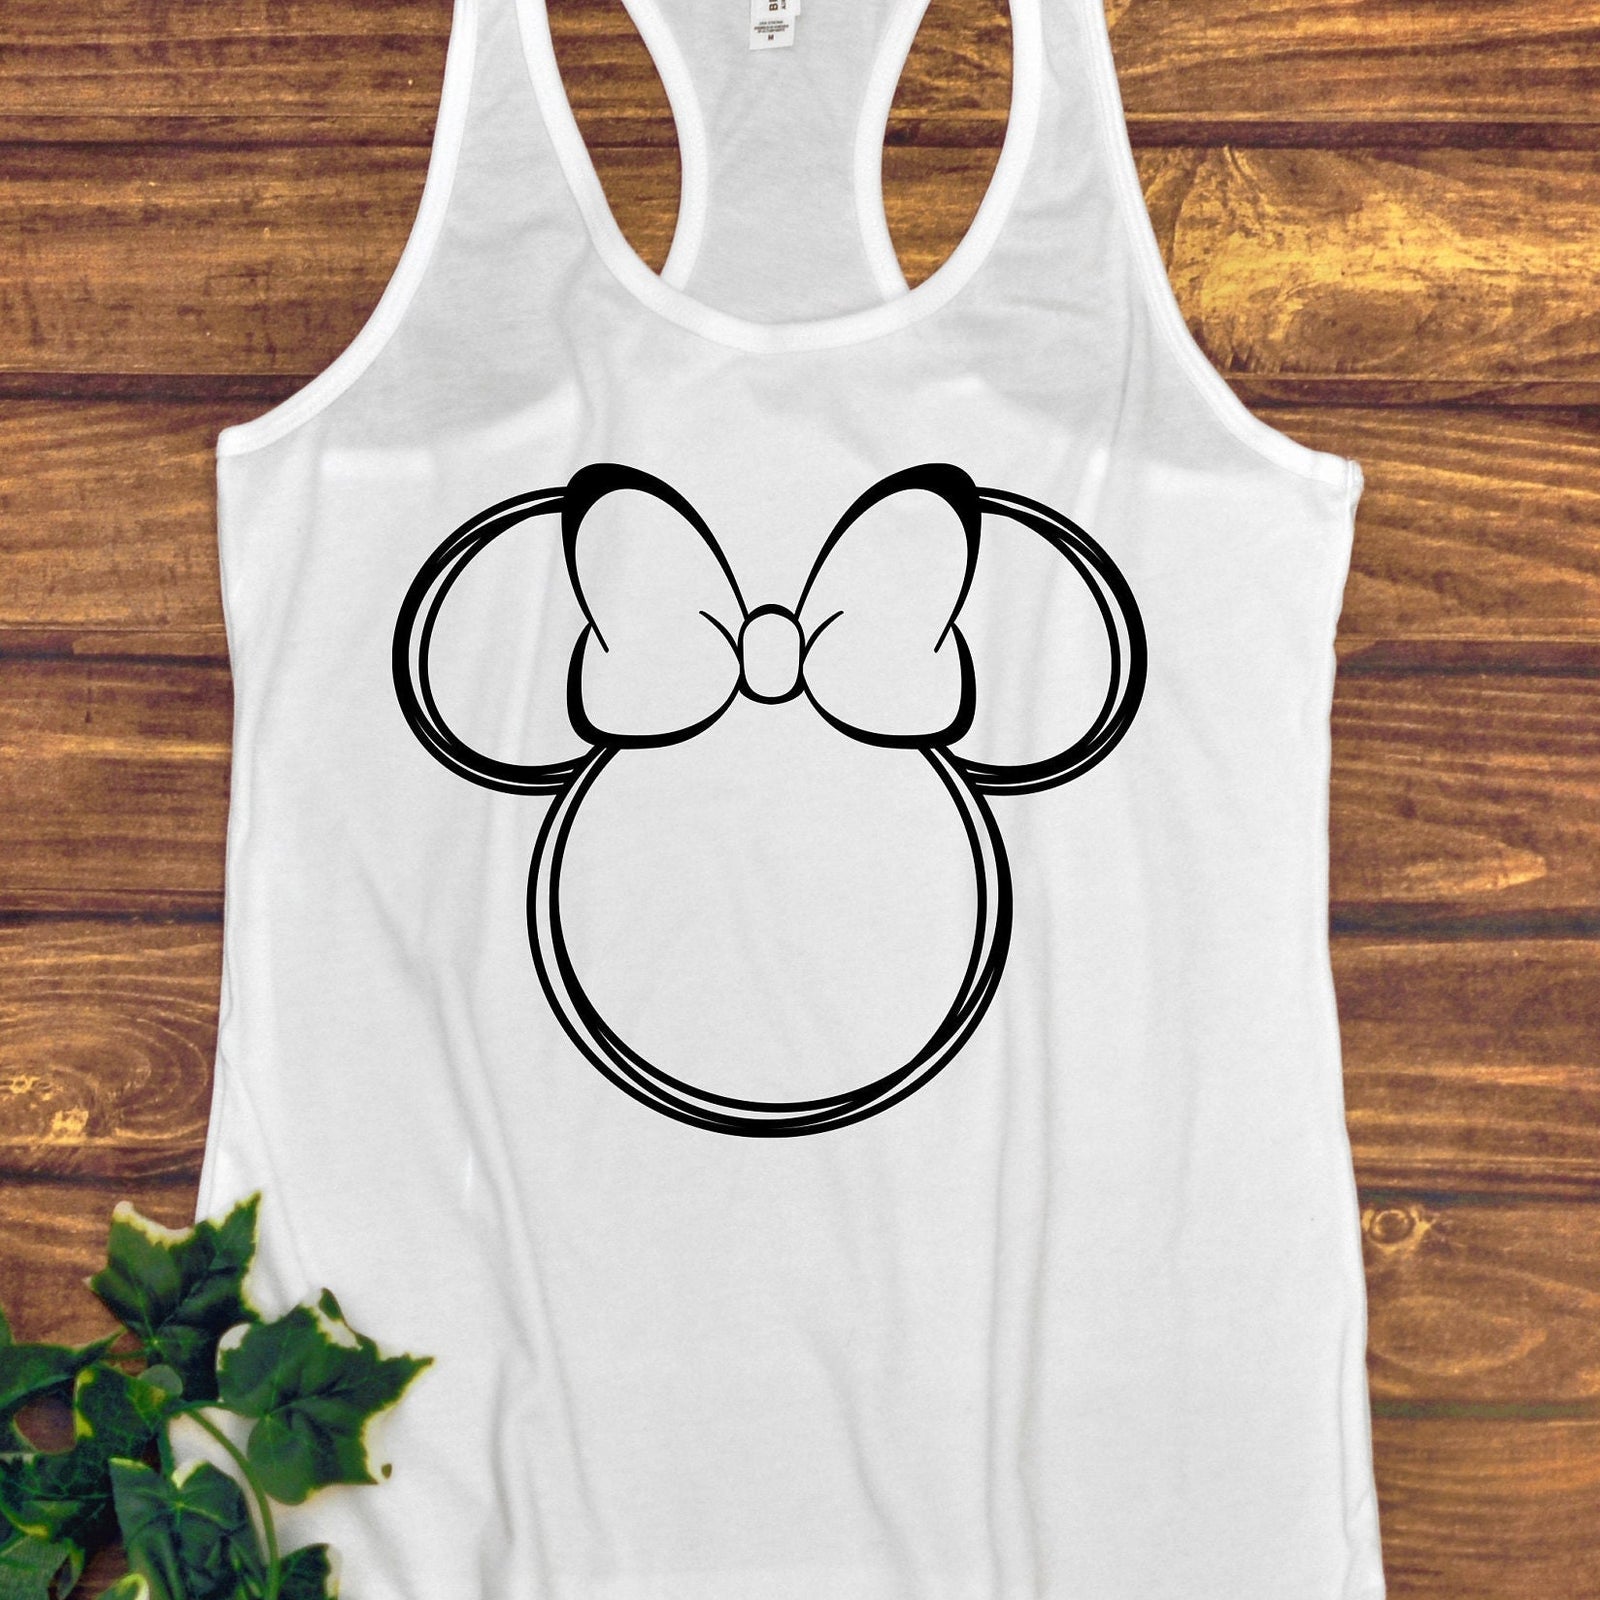 Scribble Minnie Mouse Adult Racer back Tank Top- Drinks - Sketch - Hand Drawn